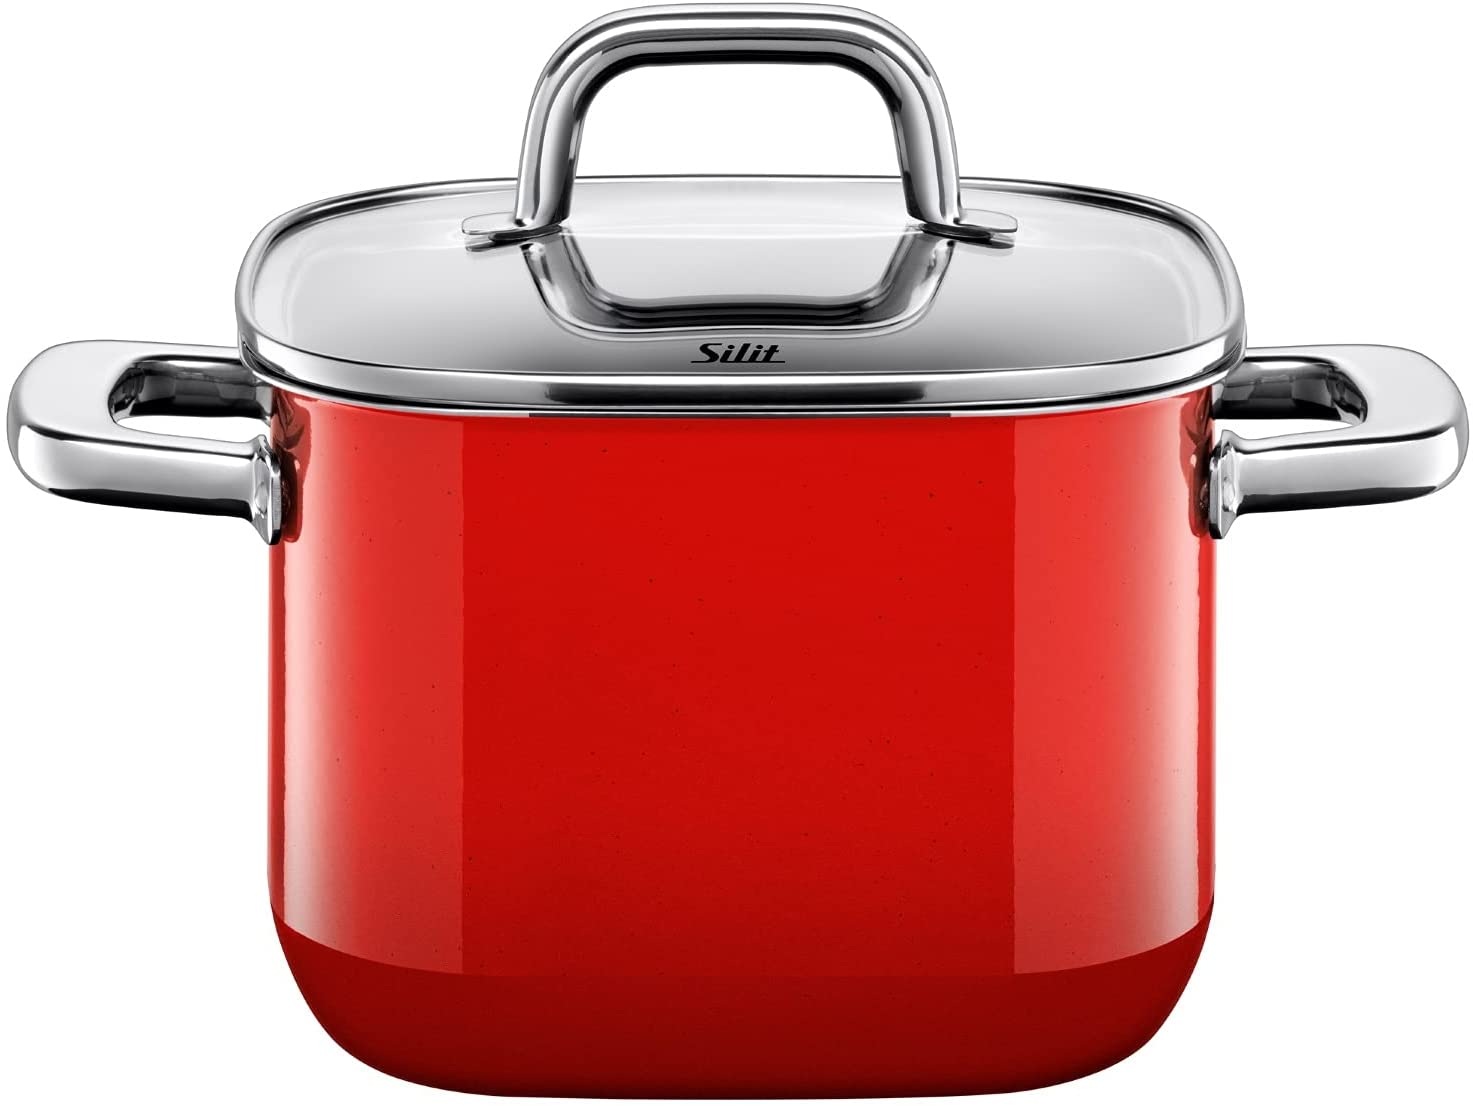 Silit Quadro 2102299554 Cooking Pot Tall 18 cm Diameter Approx. 3.7 Litre Square Pot Stackable Glass Silargan Function Lid Ceramic Suitable for Induction Cookers Dishwasher Safe Red Enamel 26 cm